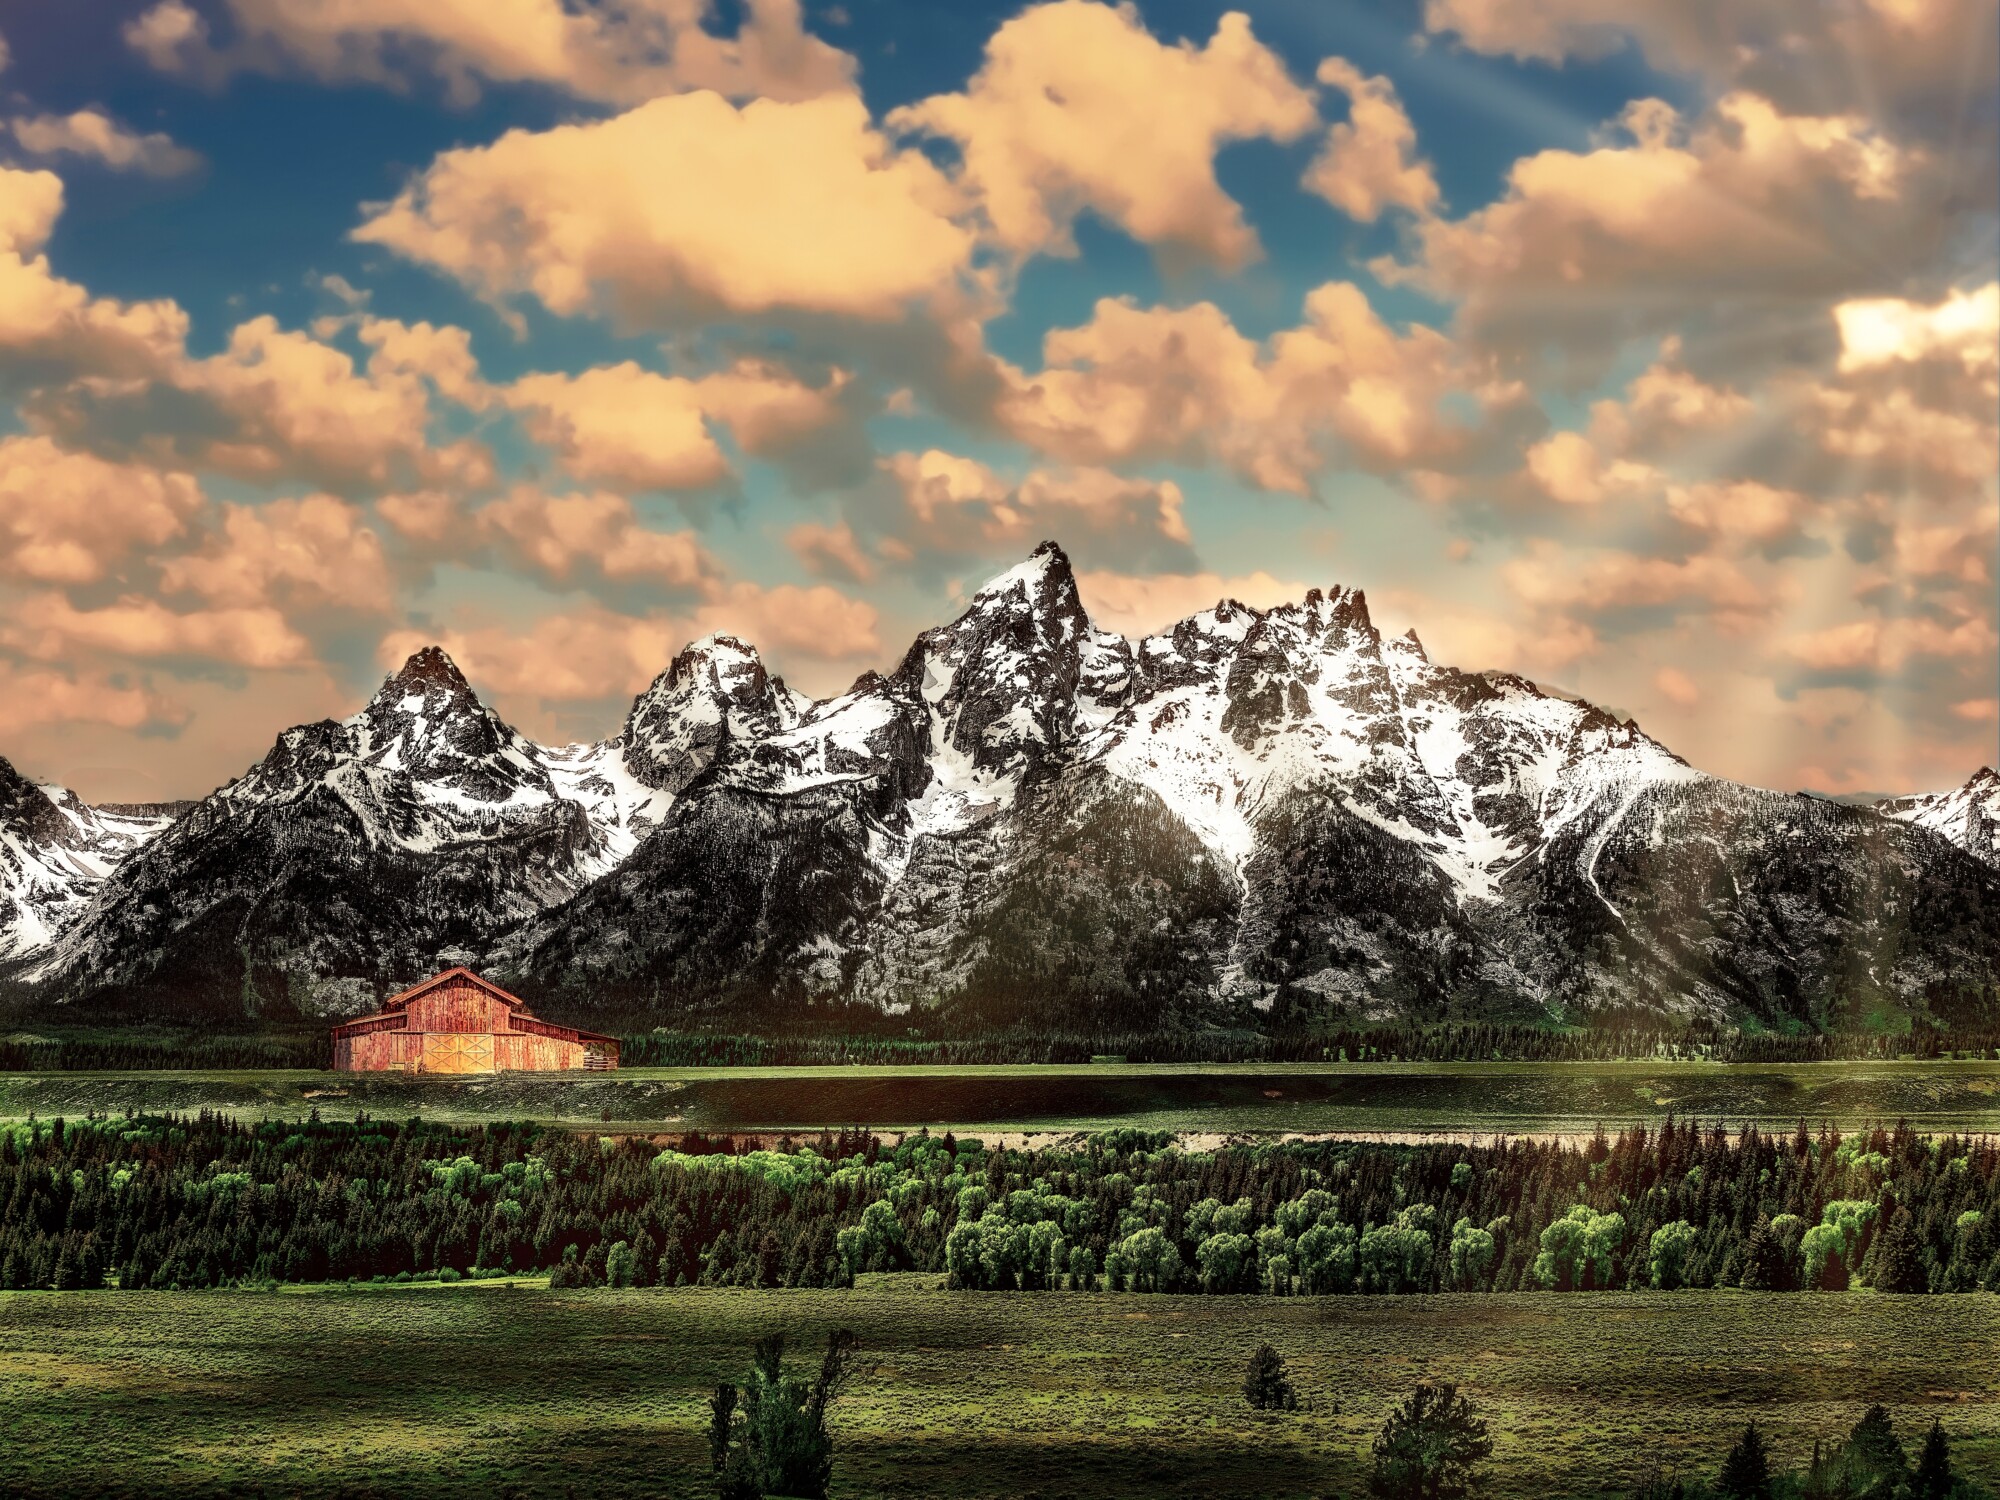 Beautiful shot of the Grand Teton National Park in Wyoming with snowy mountains in the distance